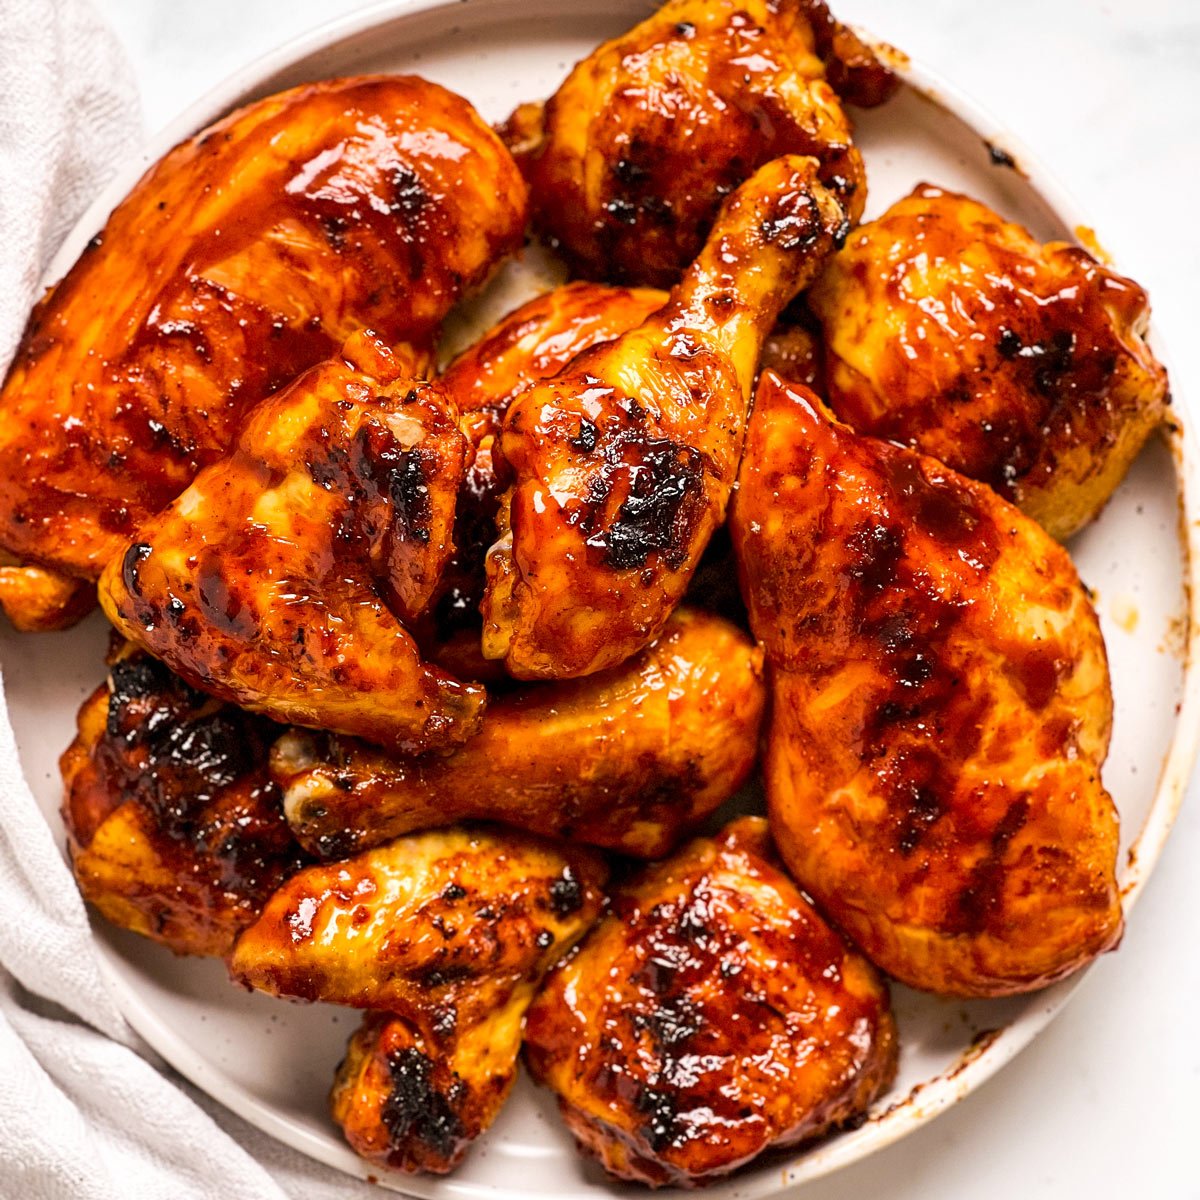 Chicken - The Savory BBQ Recipe Nothings Best